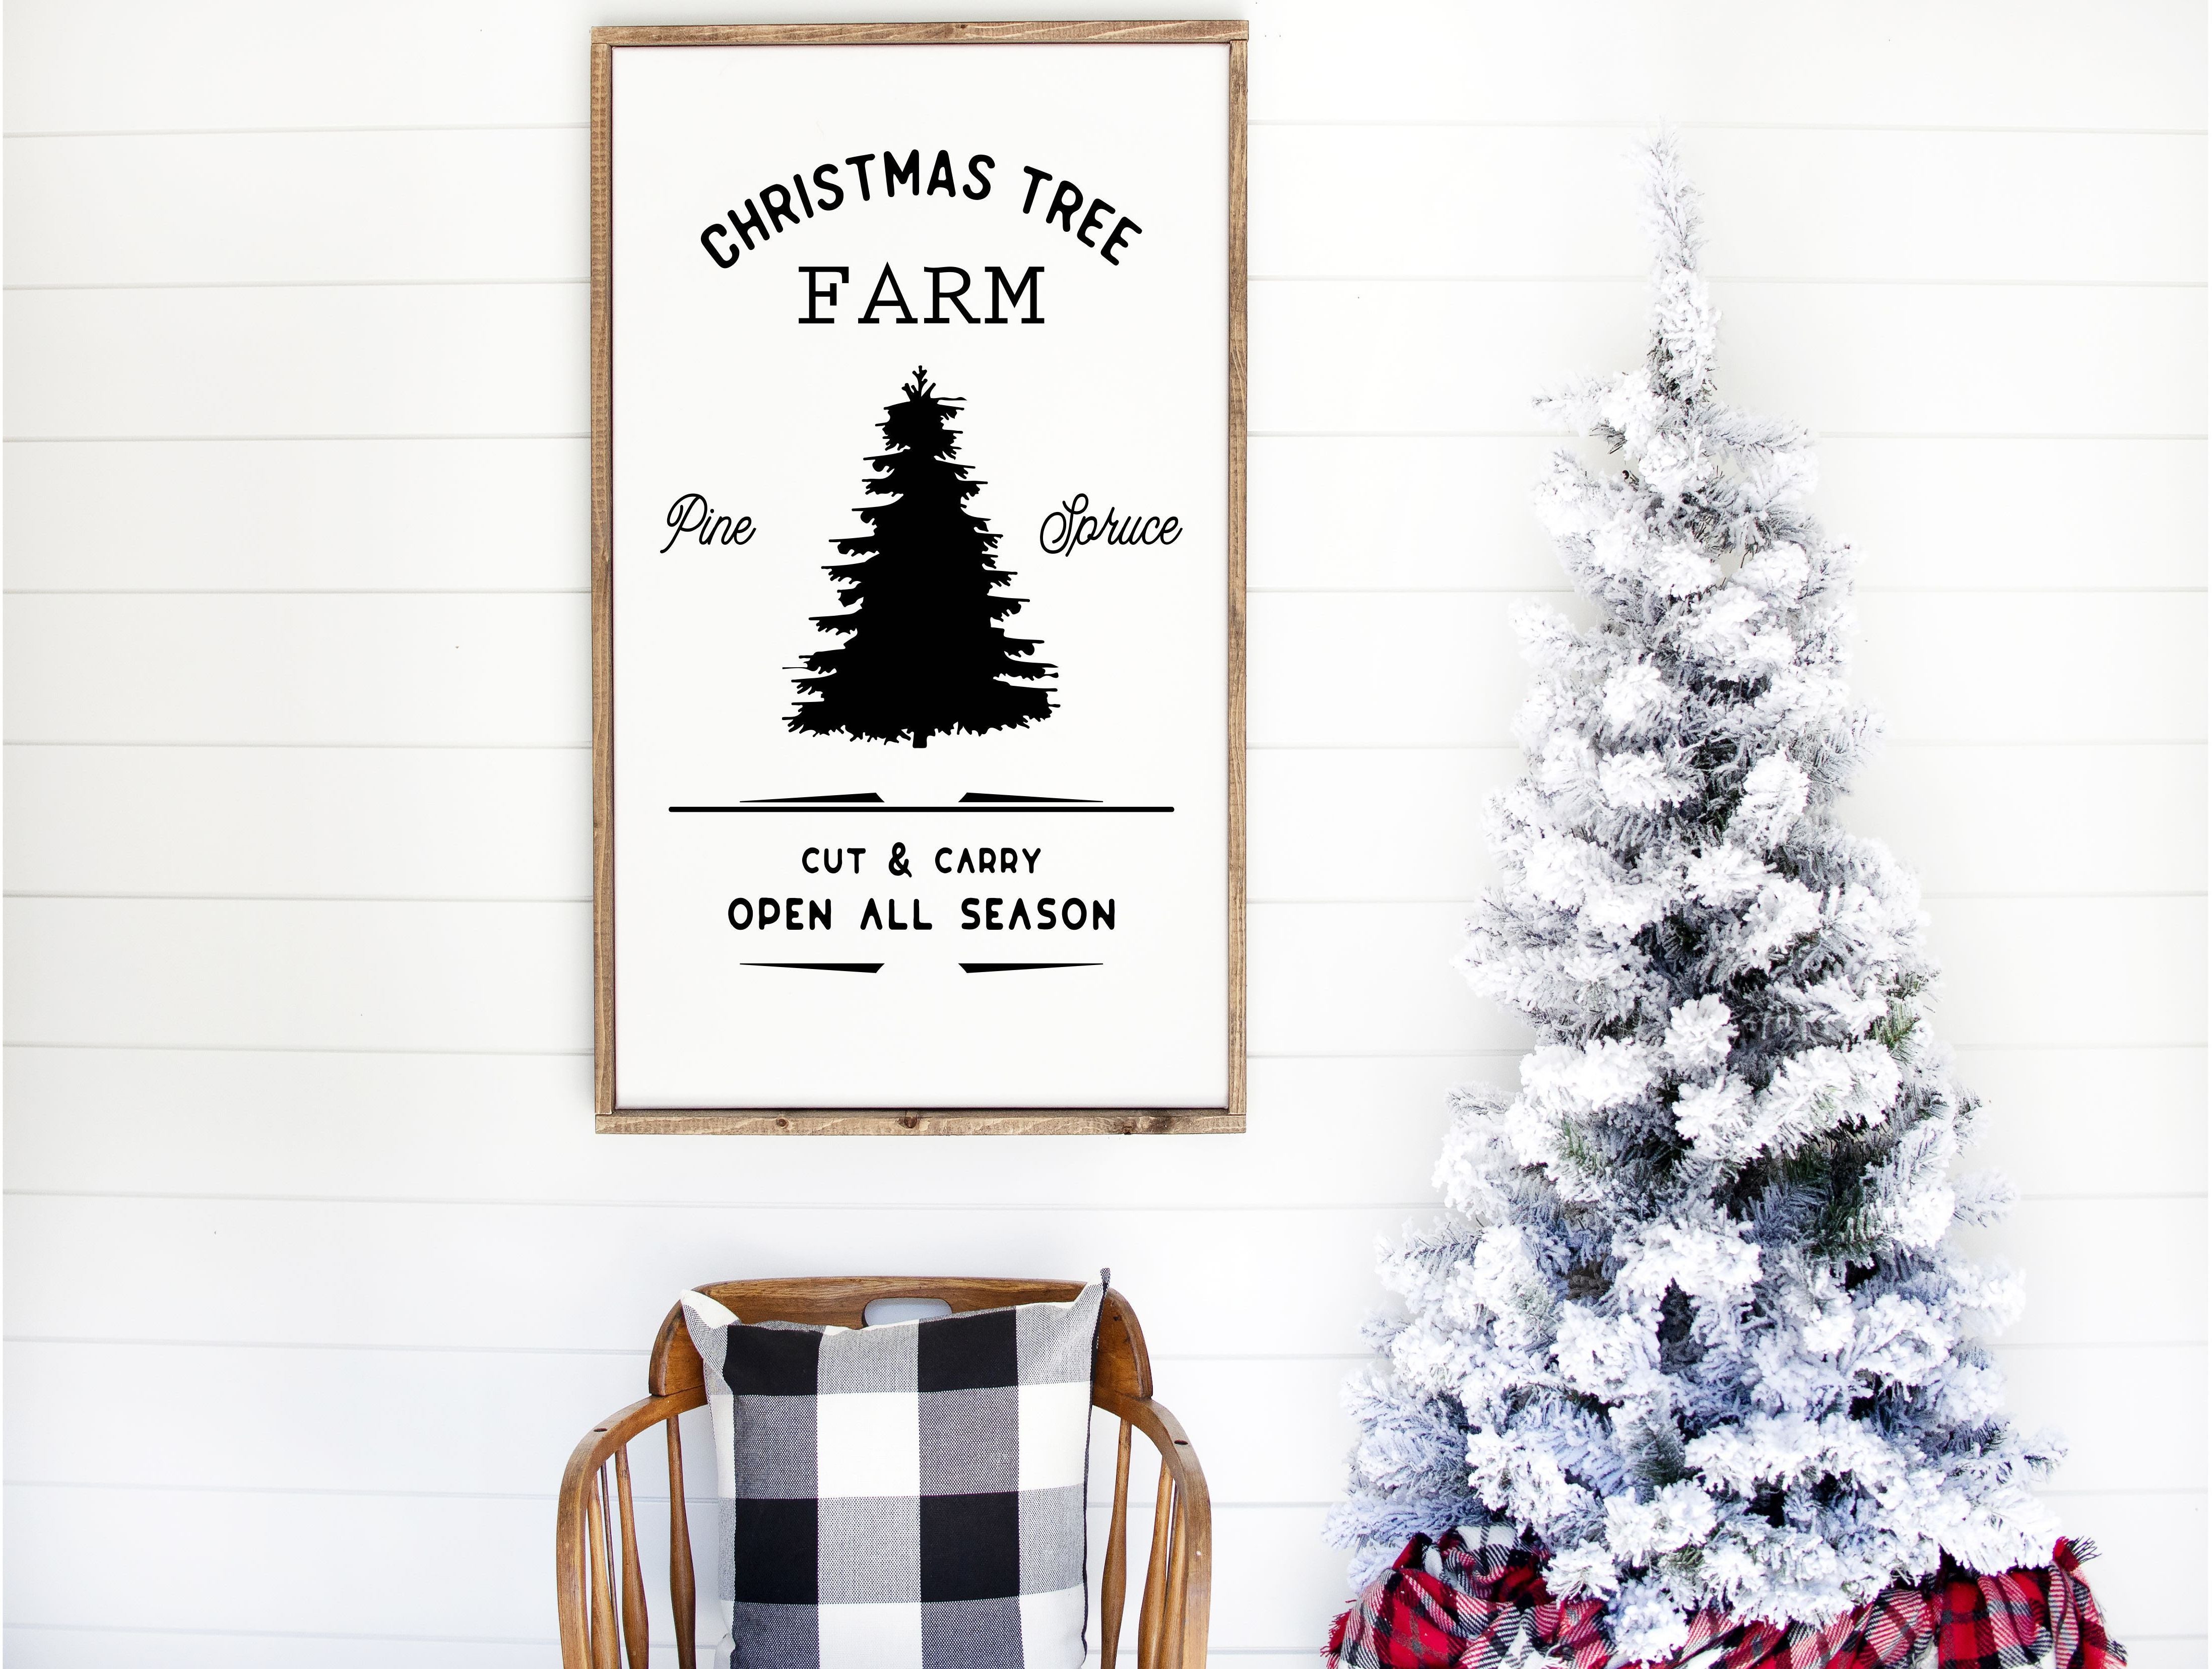 CHRISTMAS LARGE FRAMED SIGNS & MERRY MAIL